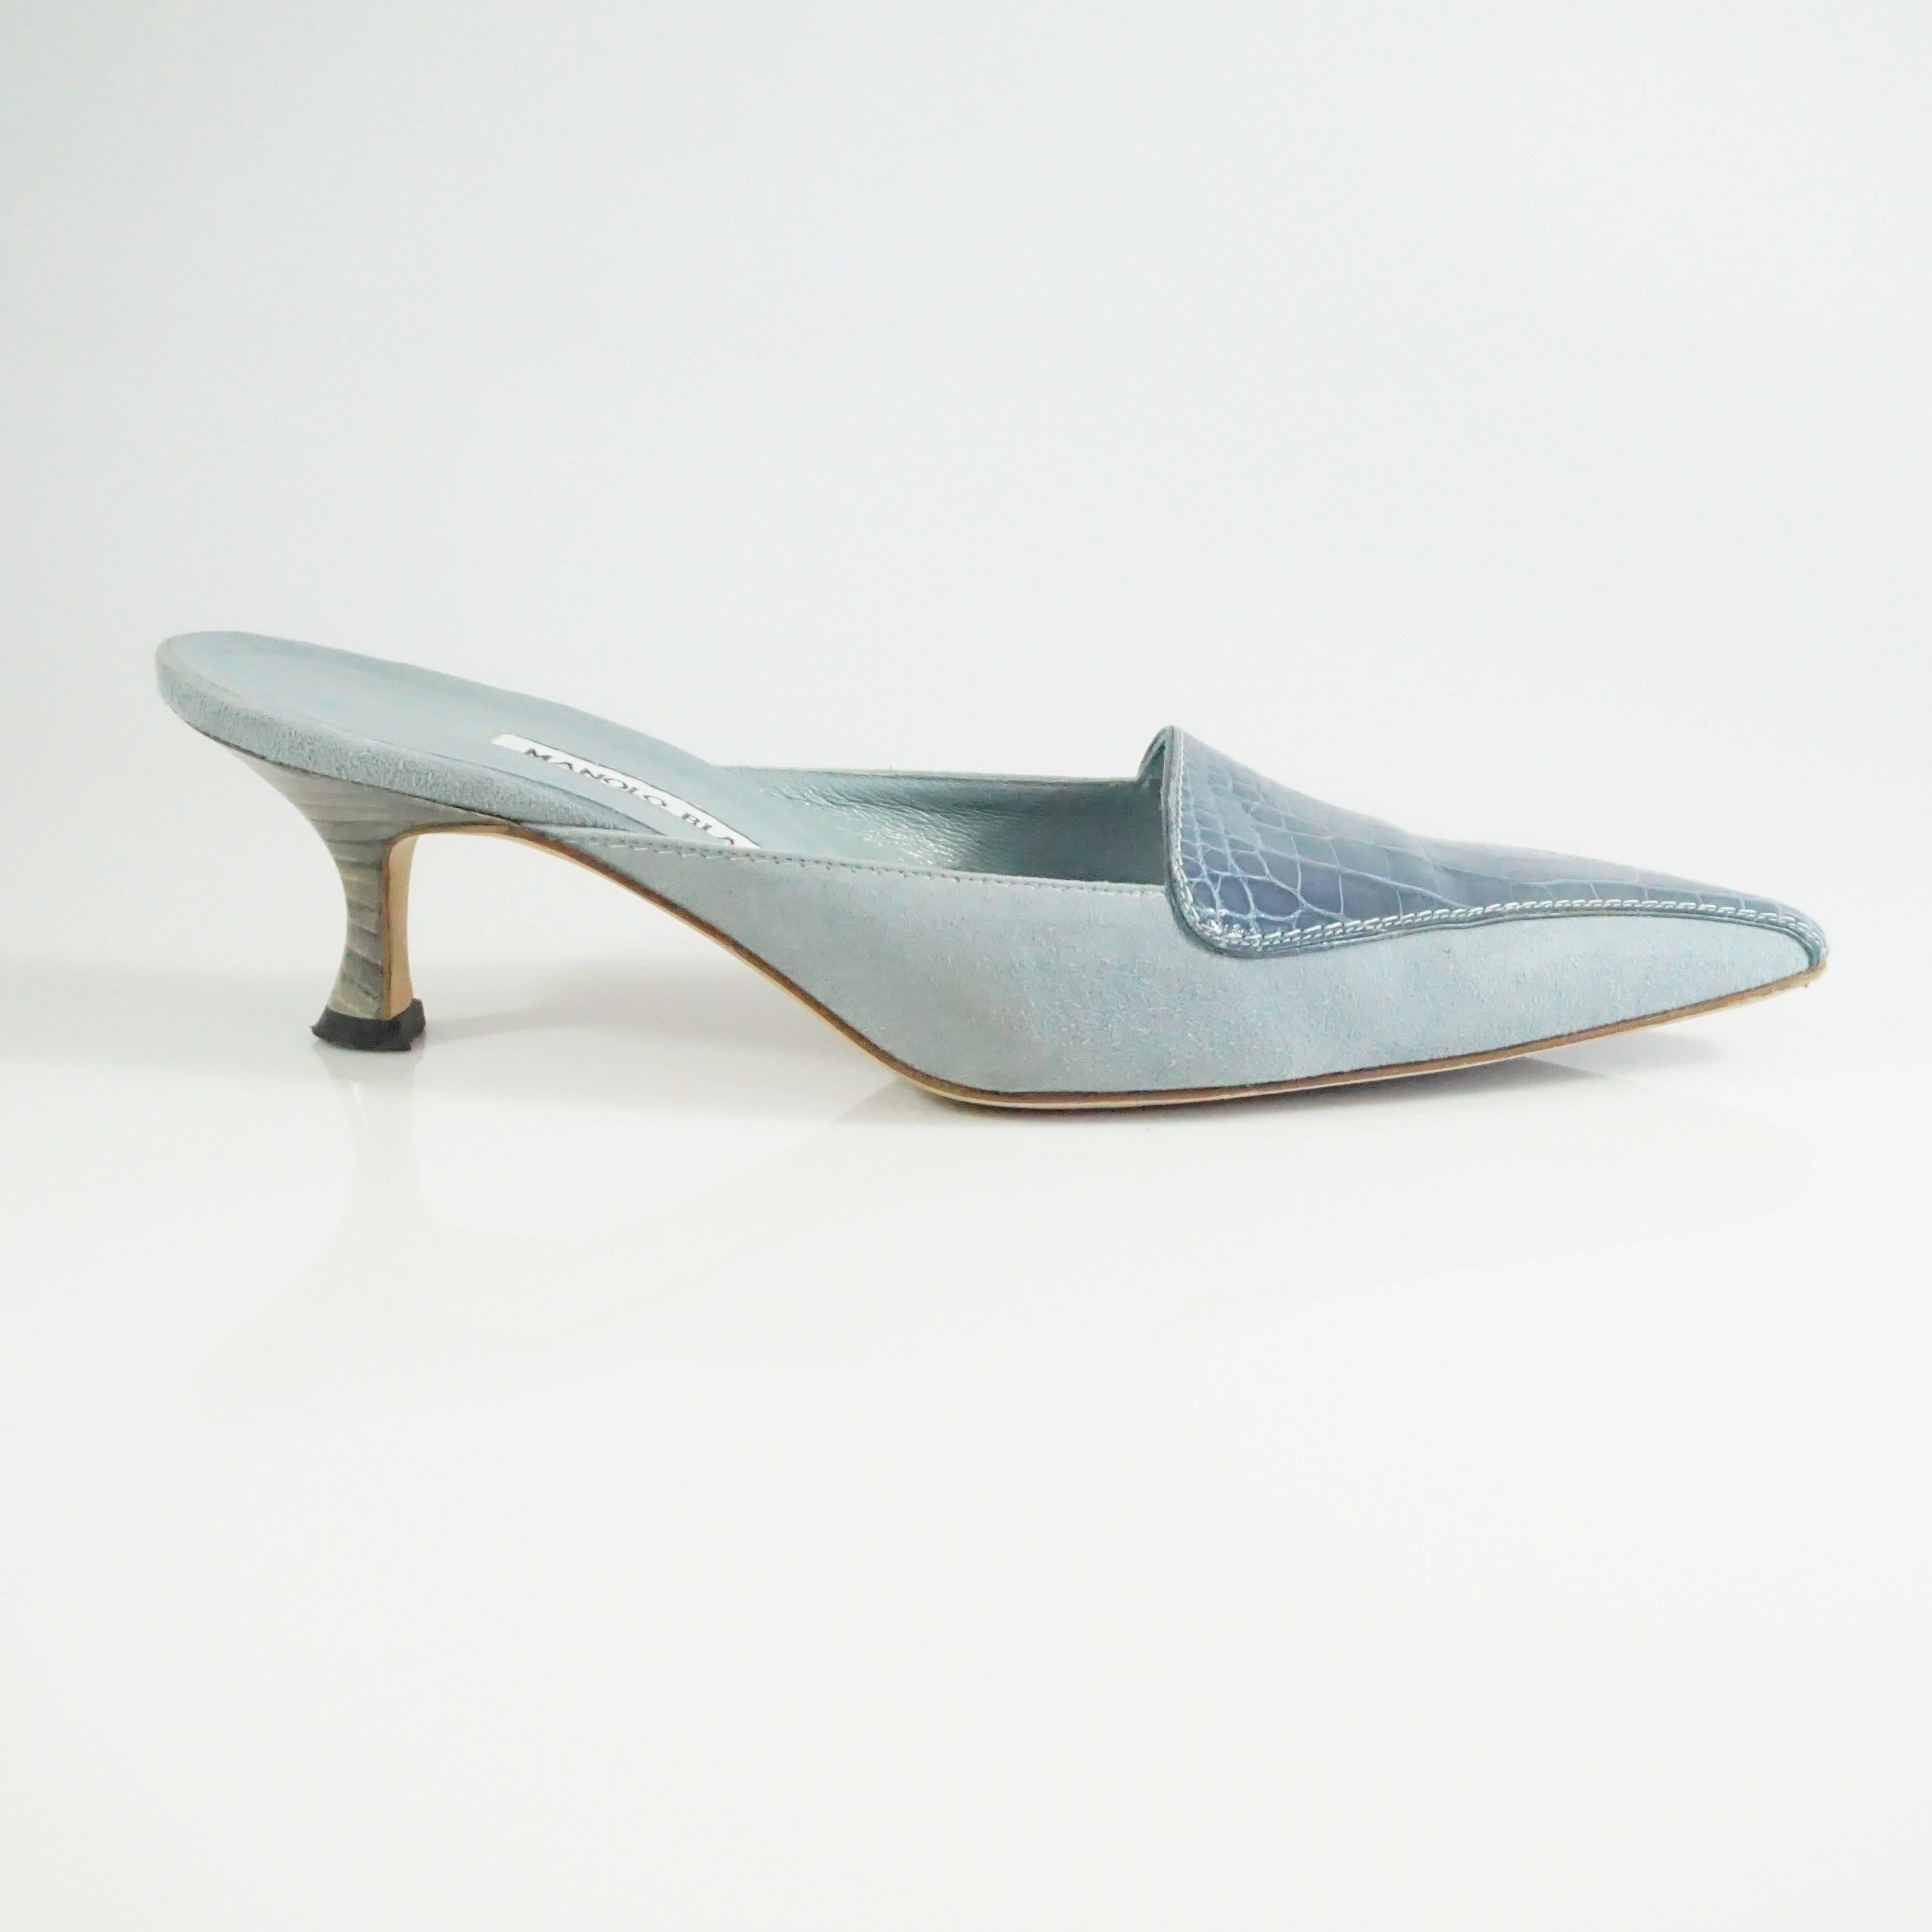 This Manolo Blahnik mules are made of a powder blue suede and crocodile. The heeled slides are in fair condition with some wear to the suede, sole, and heel (all shown in the last images). Size 38.5

Heel:2.5